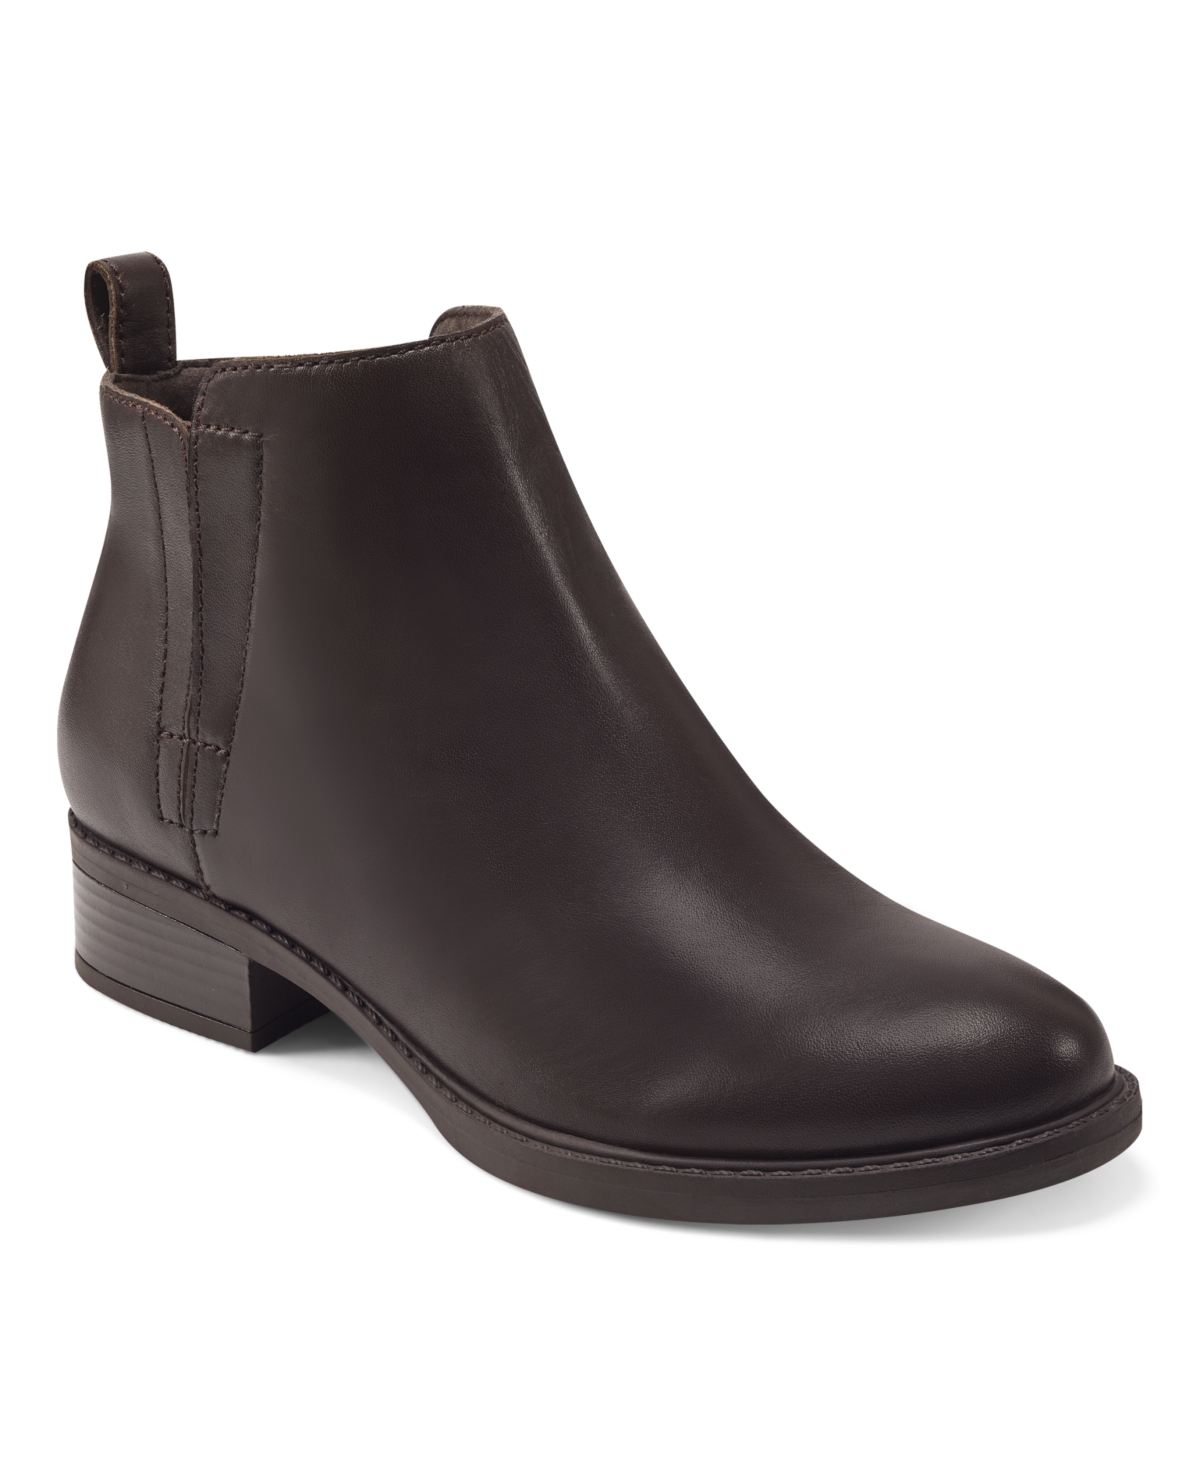 Women's Larime Ankle Booties - Dark Brown Leather